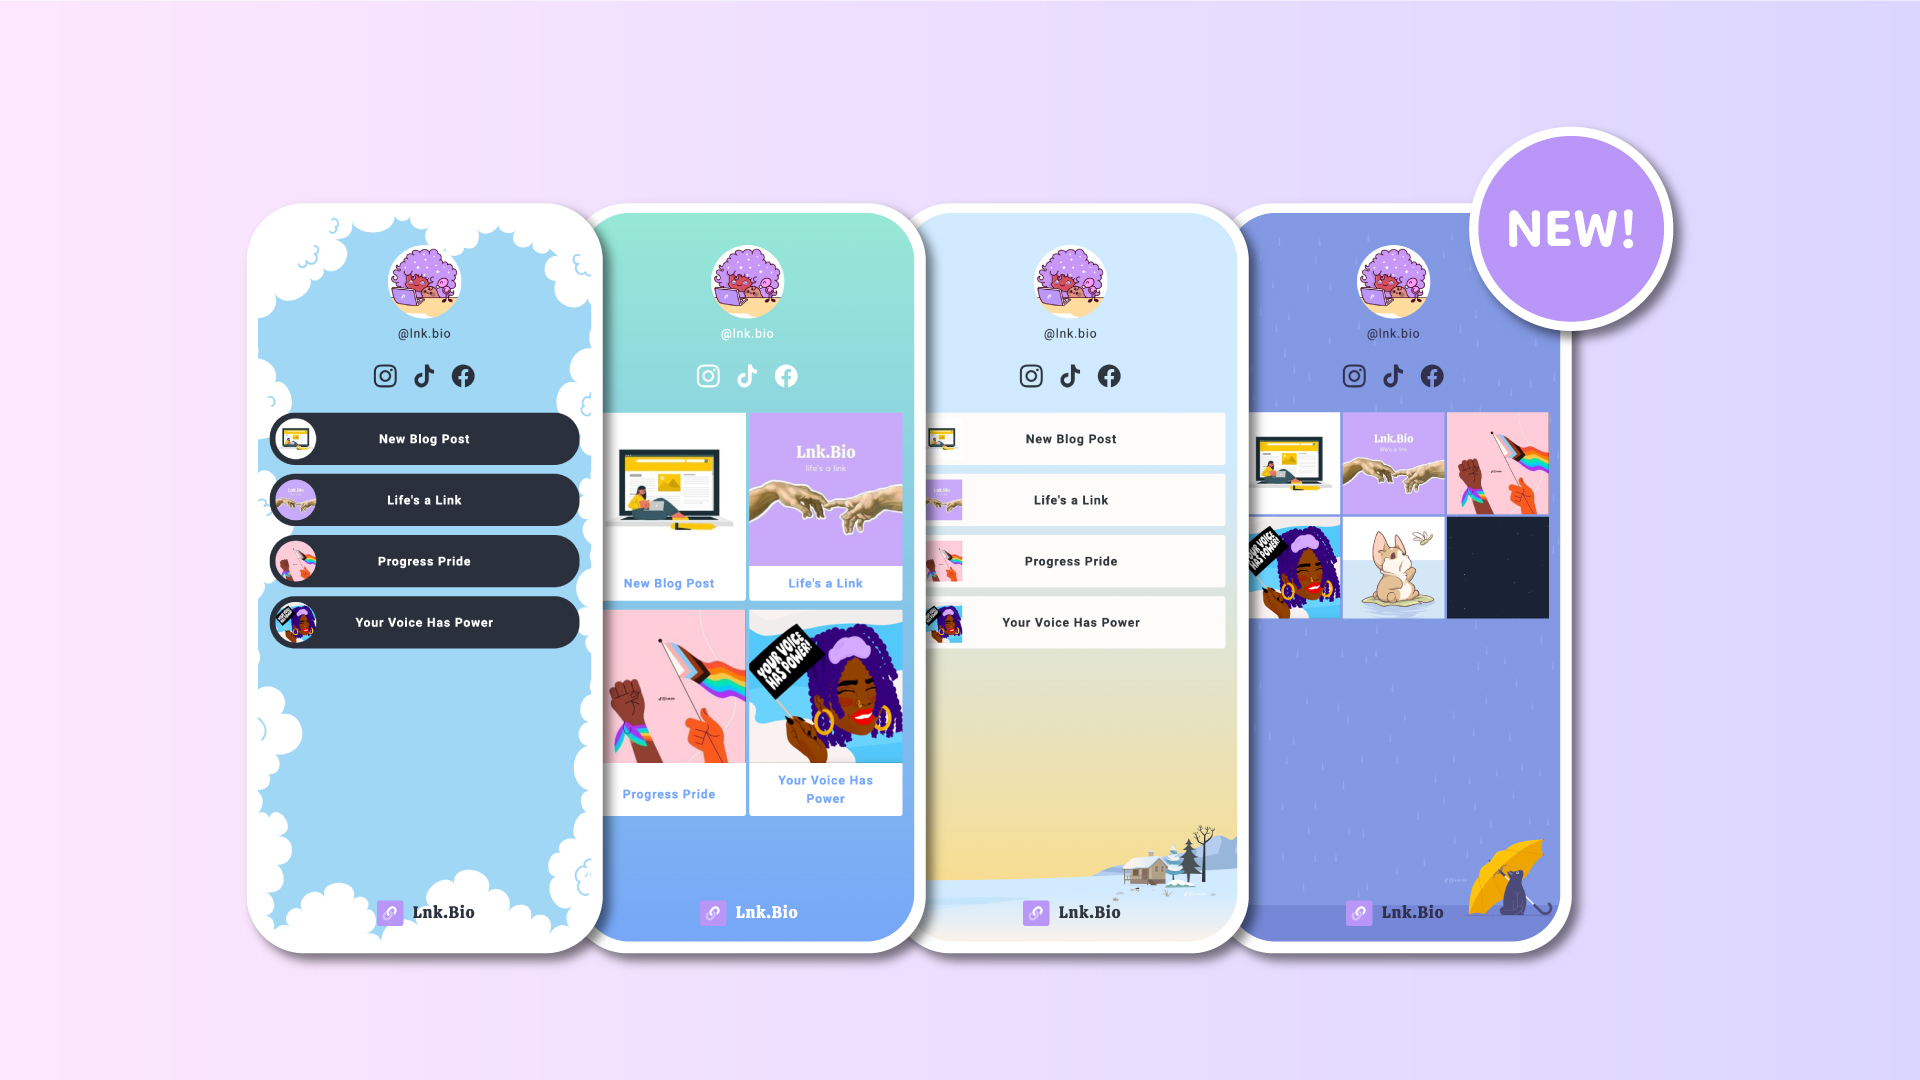 11 stunning new themes, wallpapers, and colors for your linkinbio page